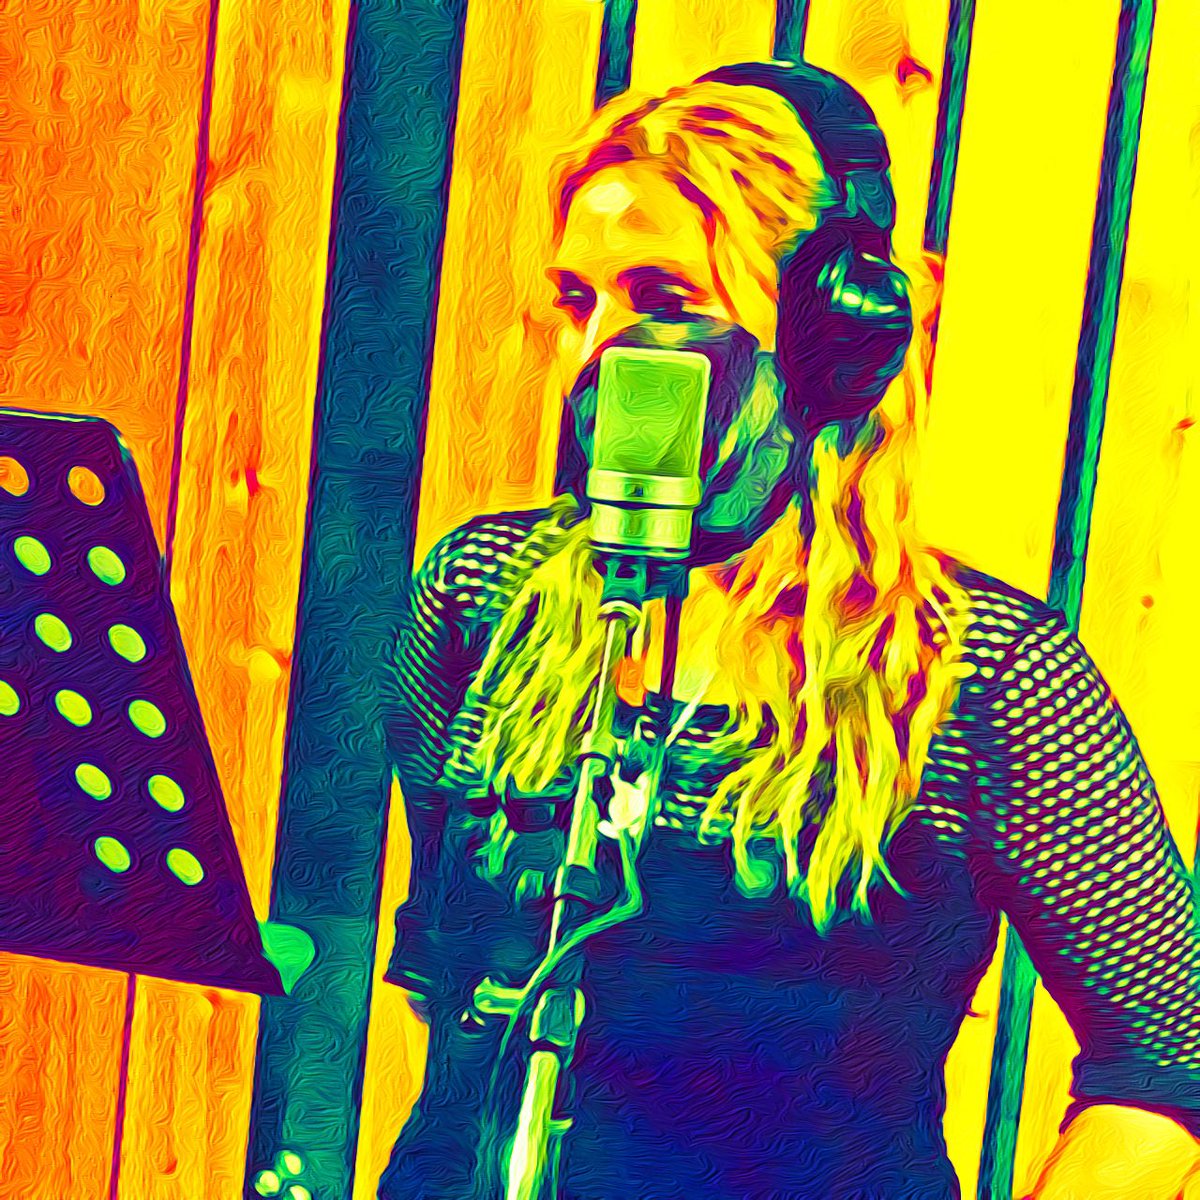 SHARON CARDIFF BAND LIVE AND IN RECORDING STUDIO #CHECK US OUT ON #spotify #spotifyplaylist #spotifyartist #shopify #spotifymusic #youtube #youtubemusic #apple #applemusic #applemusicplaylists #itunes #deezer #facebook #tiktok #tiktokmusically #smule #soundcloud #youtuber